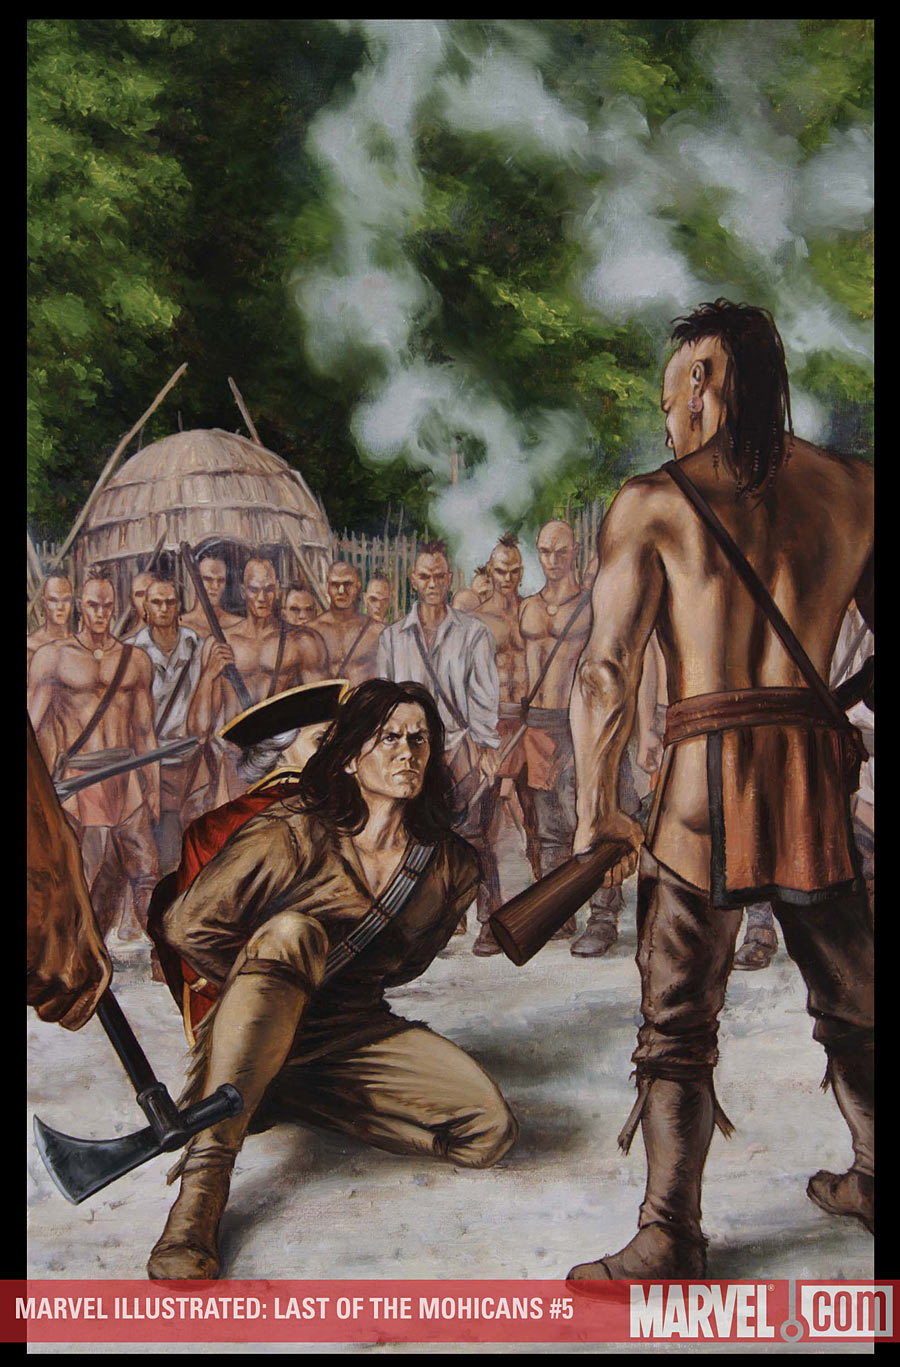 LAST OF THE MOHICANS #5 (of 6)